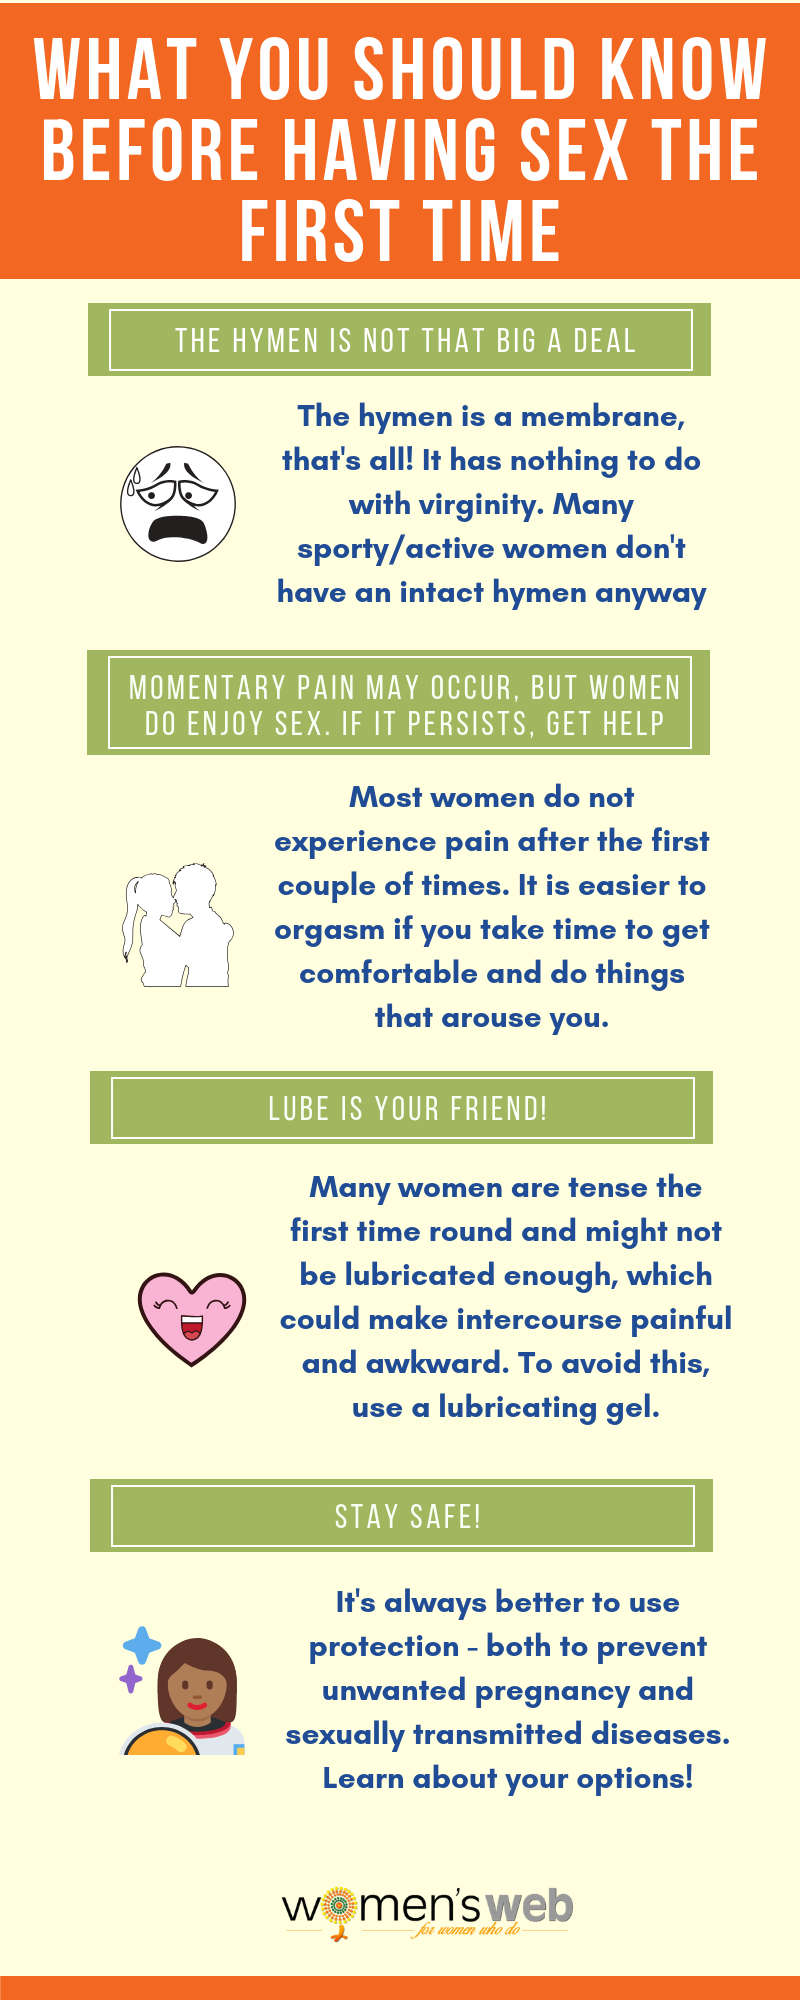 When should i first have sex